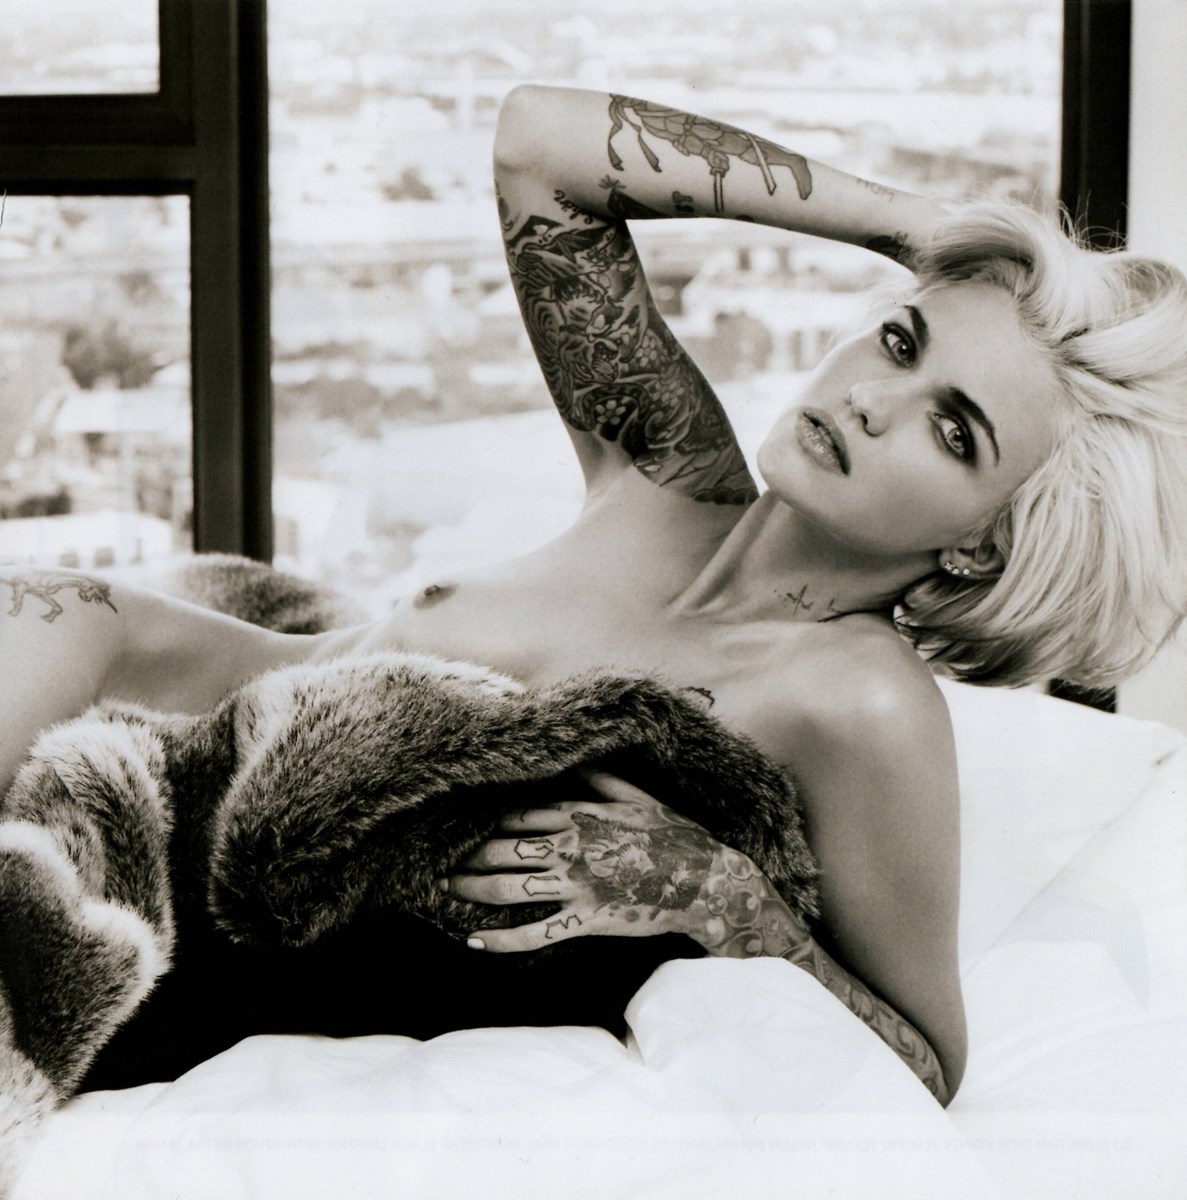 Fappening ruby rose 13 Hottest